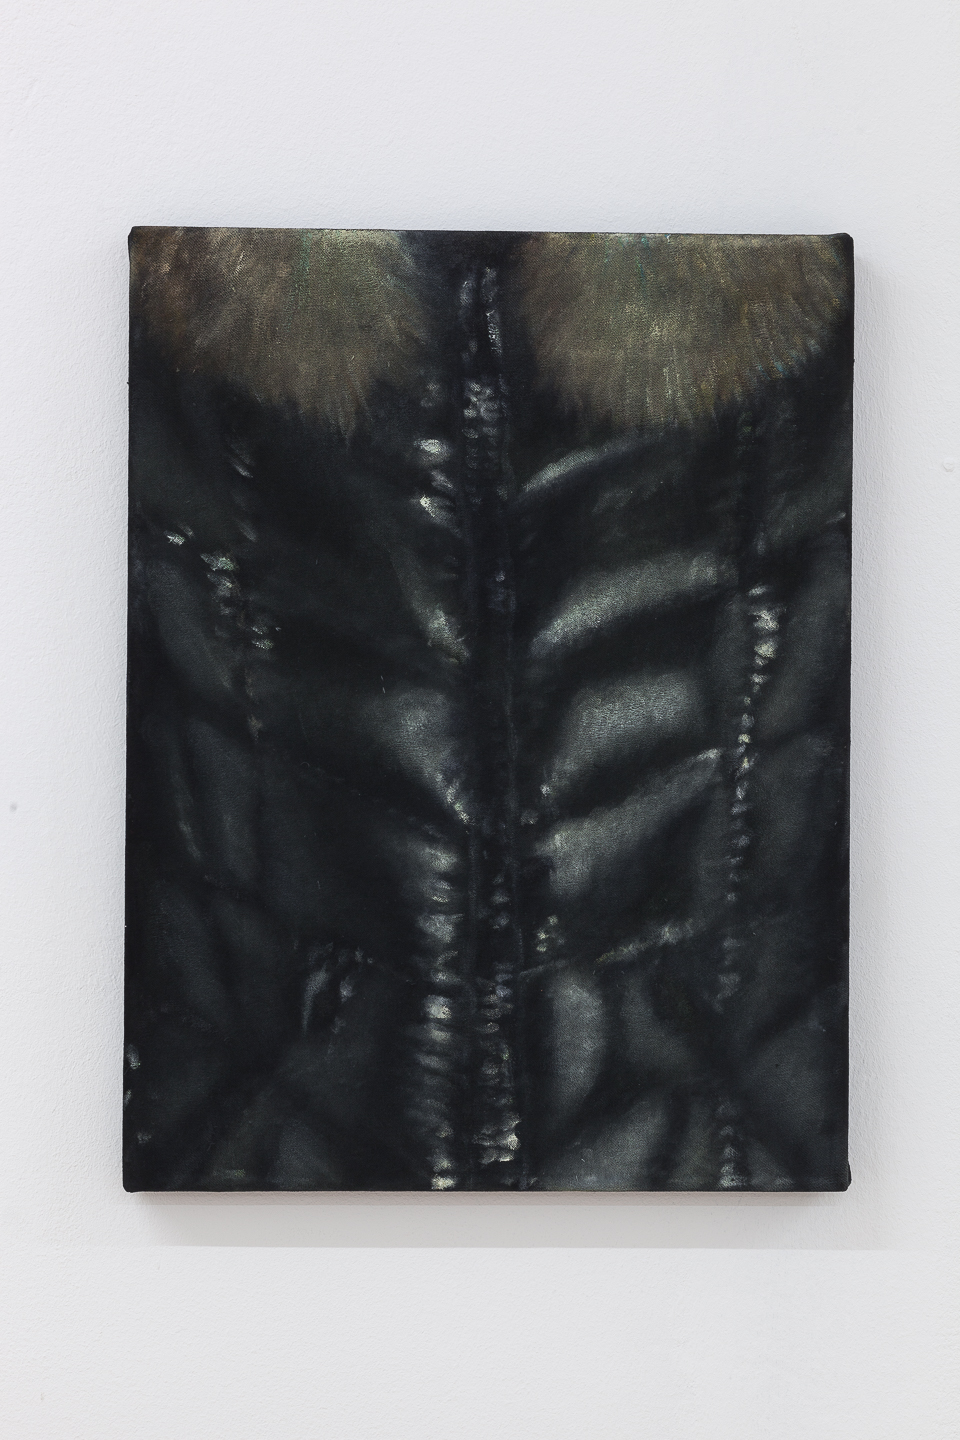 Issy Wood*1993 in US, lives and works in London Recent men and their clothes, 2020Oil on linen, oil an velvet, oil on burlap 40 x 30 cm each of five panelsoverall installed dimensions variable